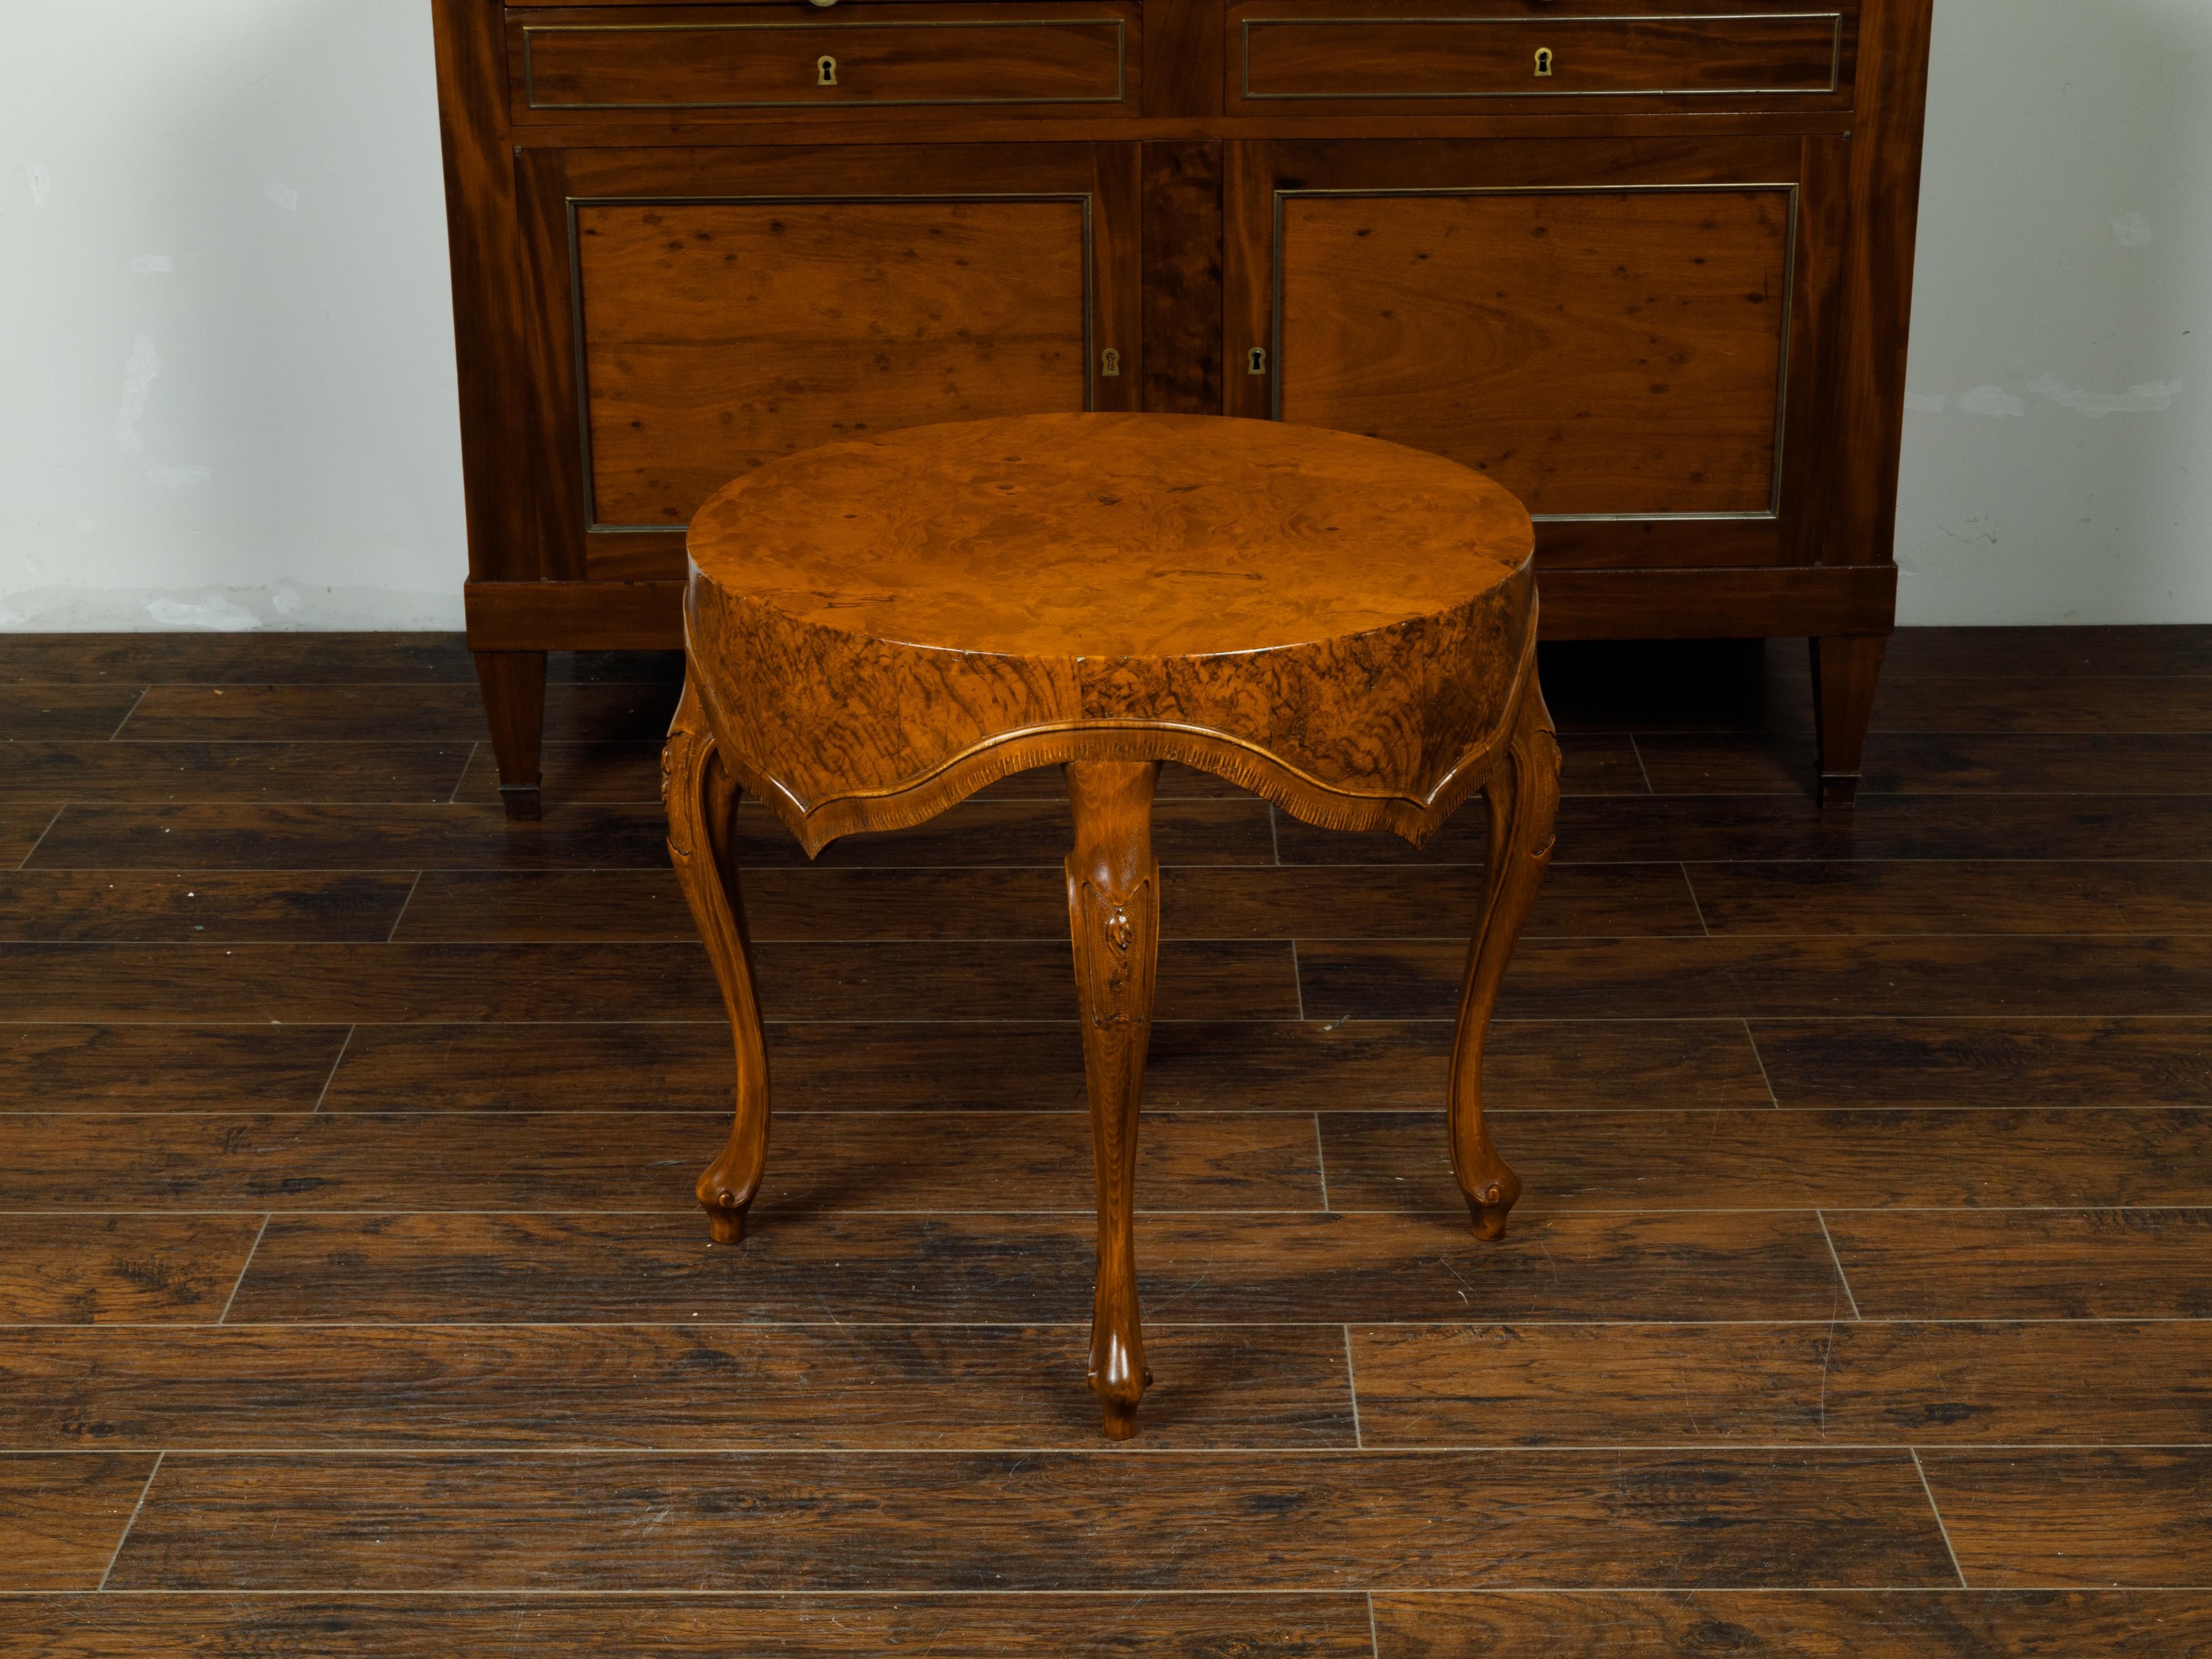 Italian Midcentury Walnut Side Table with Round Top and Unusual Carved Apron 2